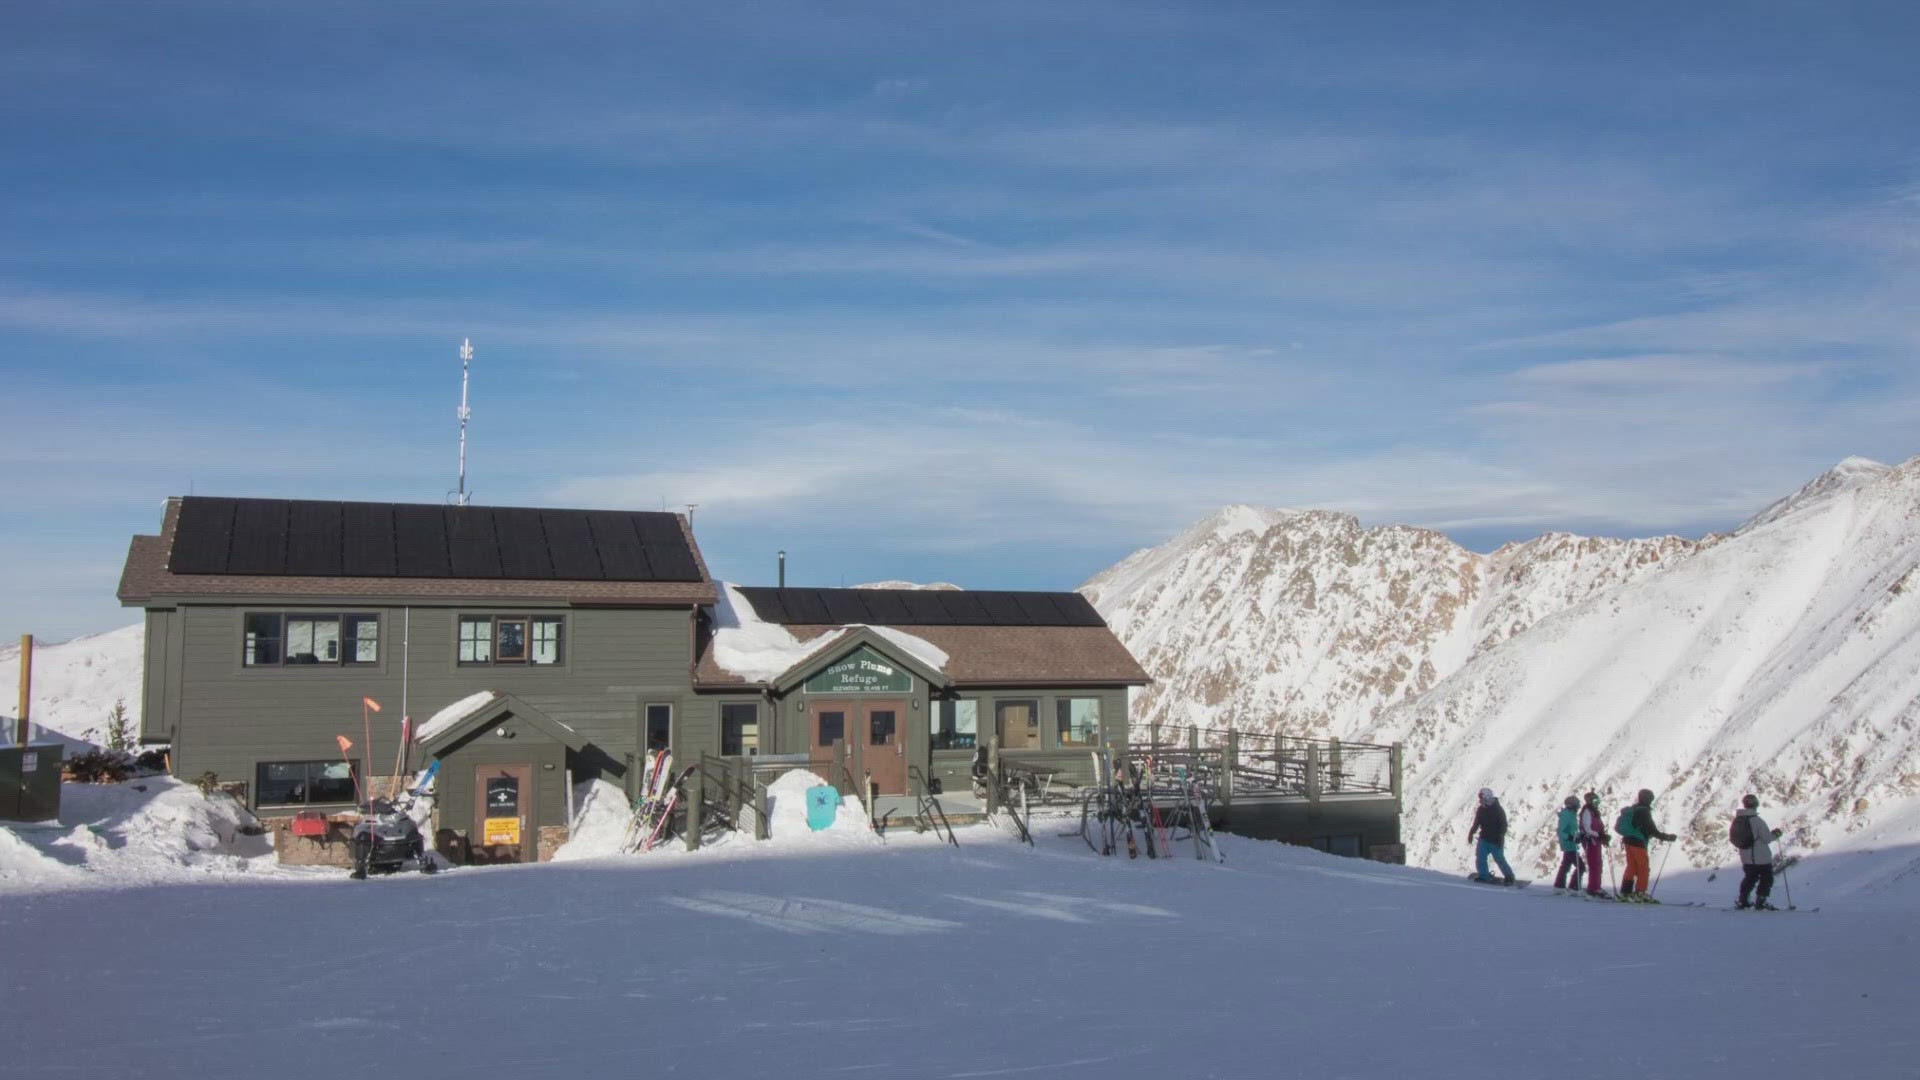 The ski area started by using 100% renewable energy in October which cut carbon emissions by more than two-thirds.